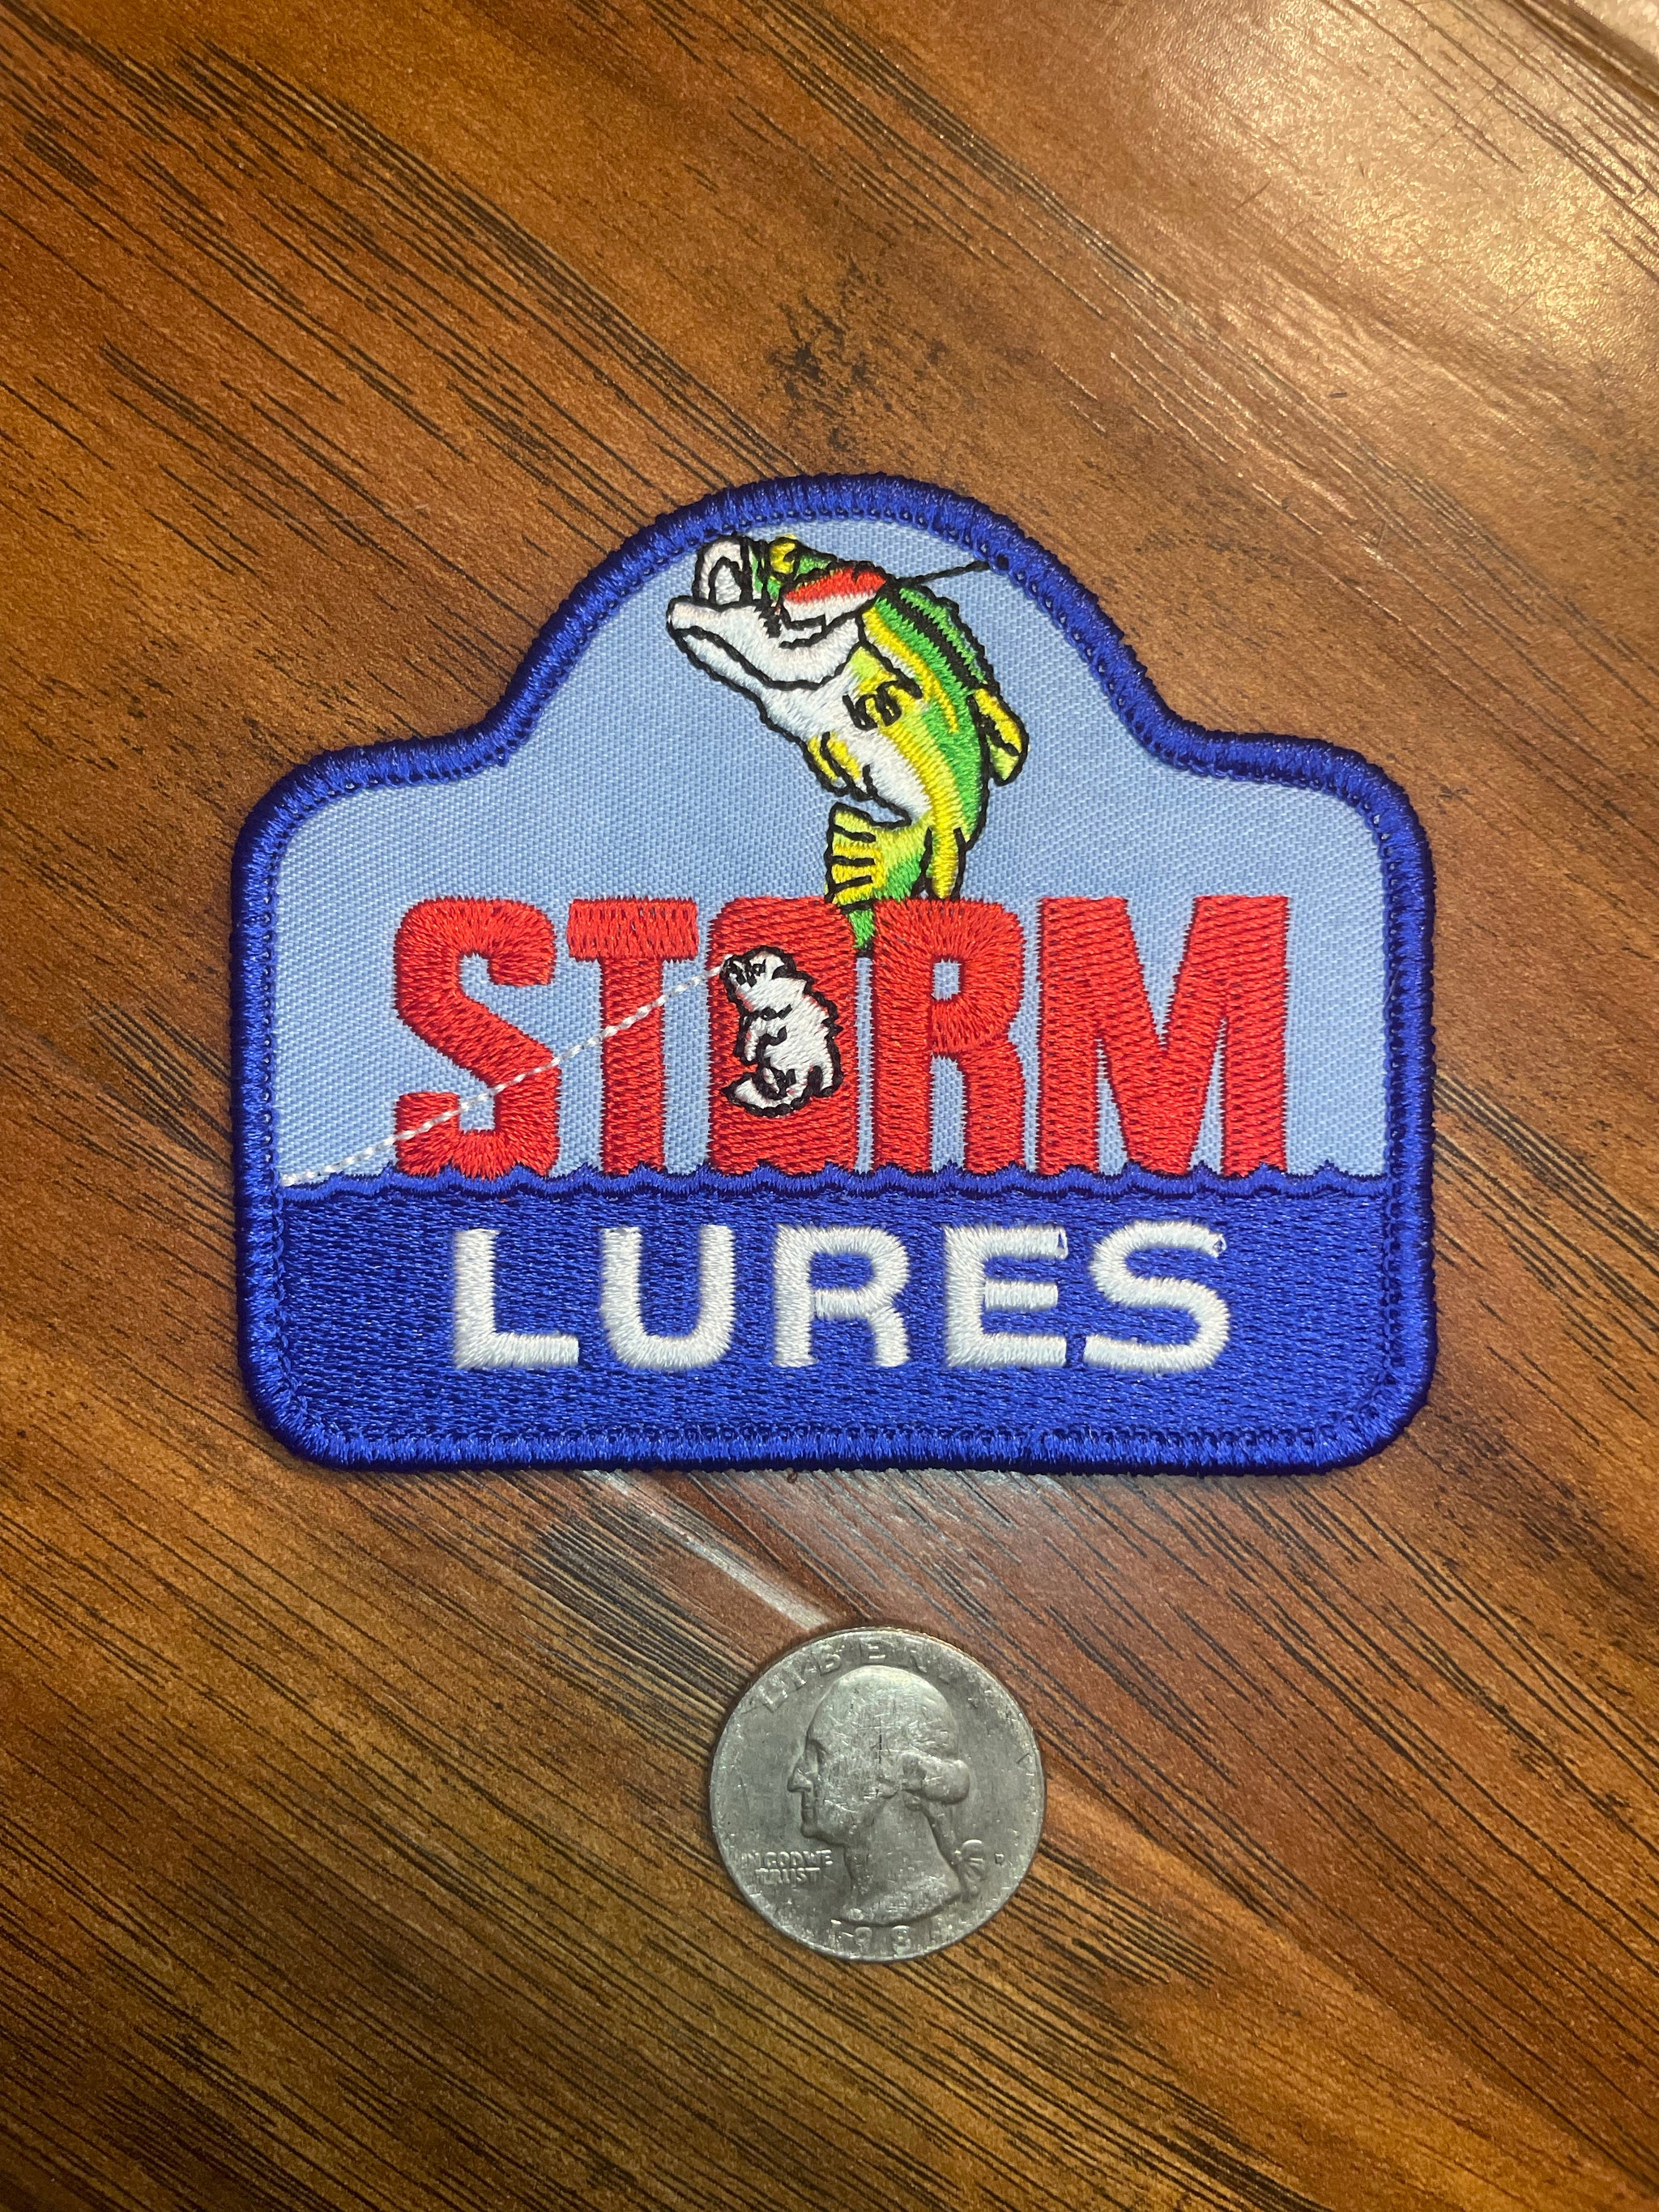 Storm Lures - The Mad Hatter Company